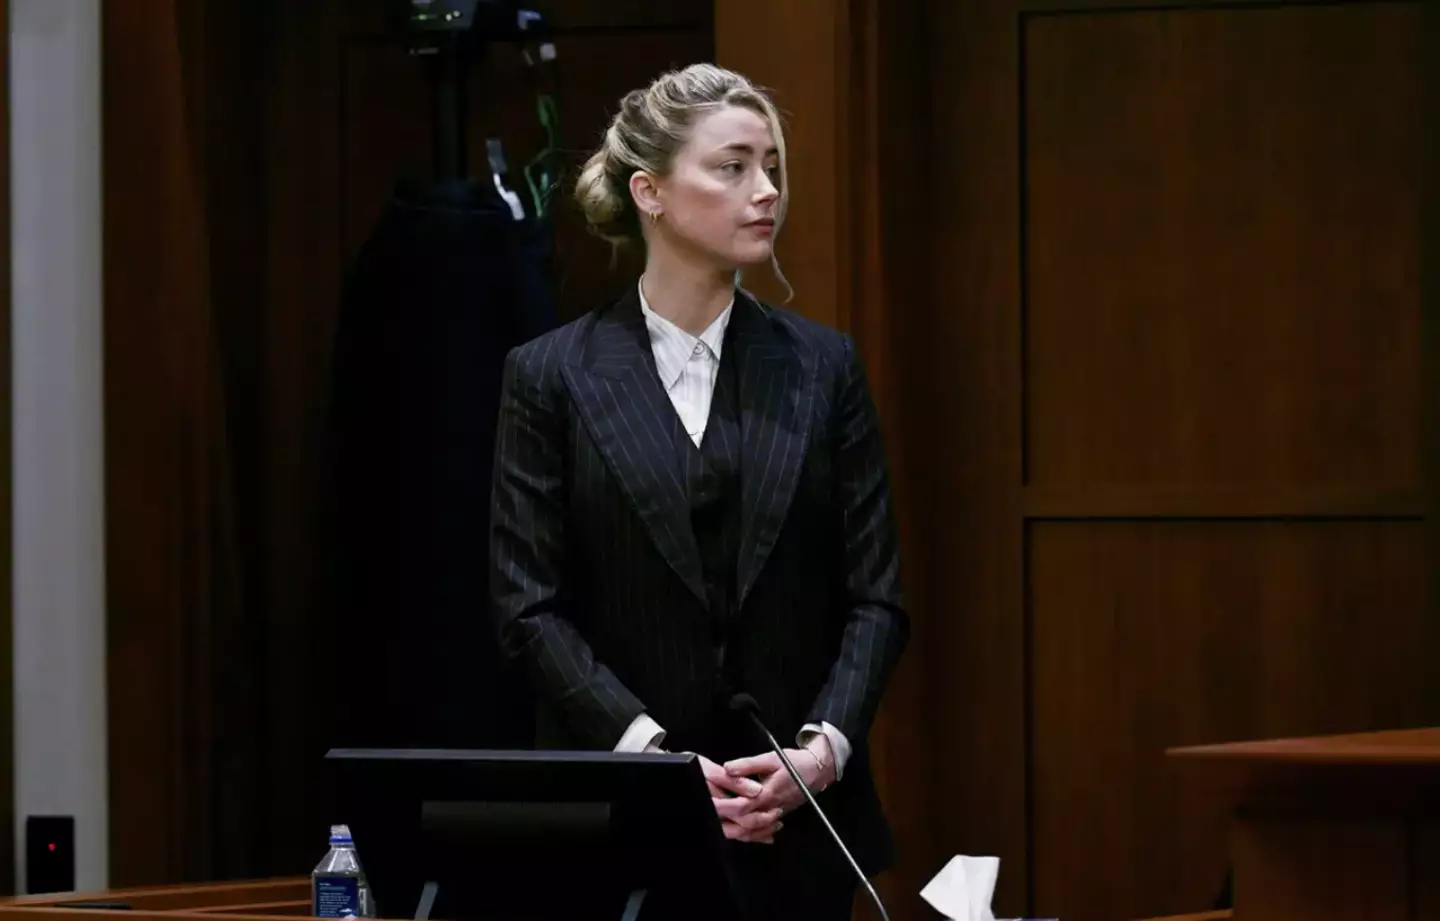 Amber Heard's potential career trajectory was likened to several A-list stars in court.